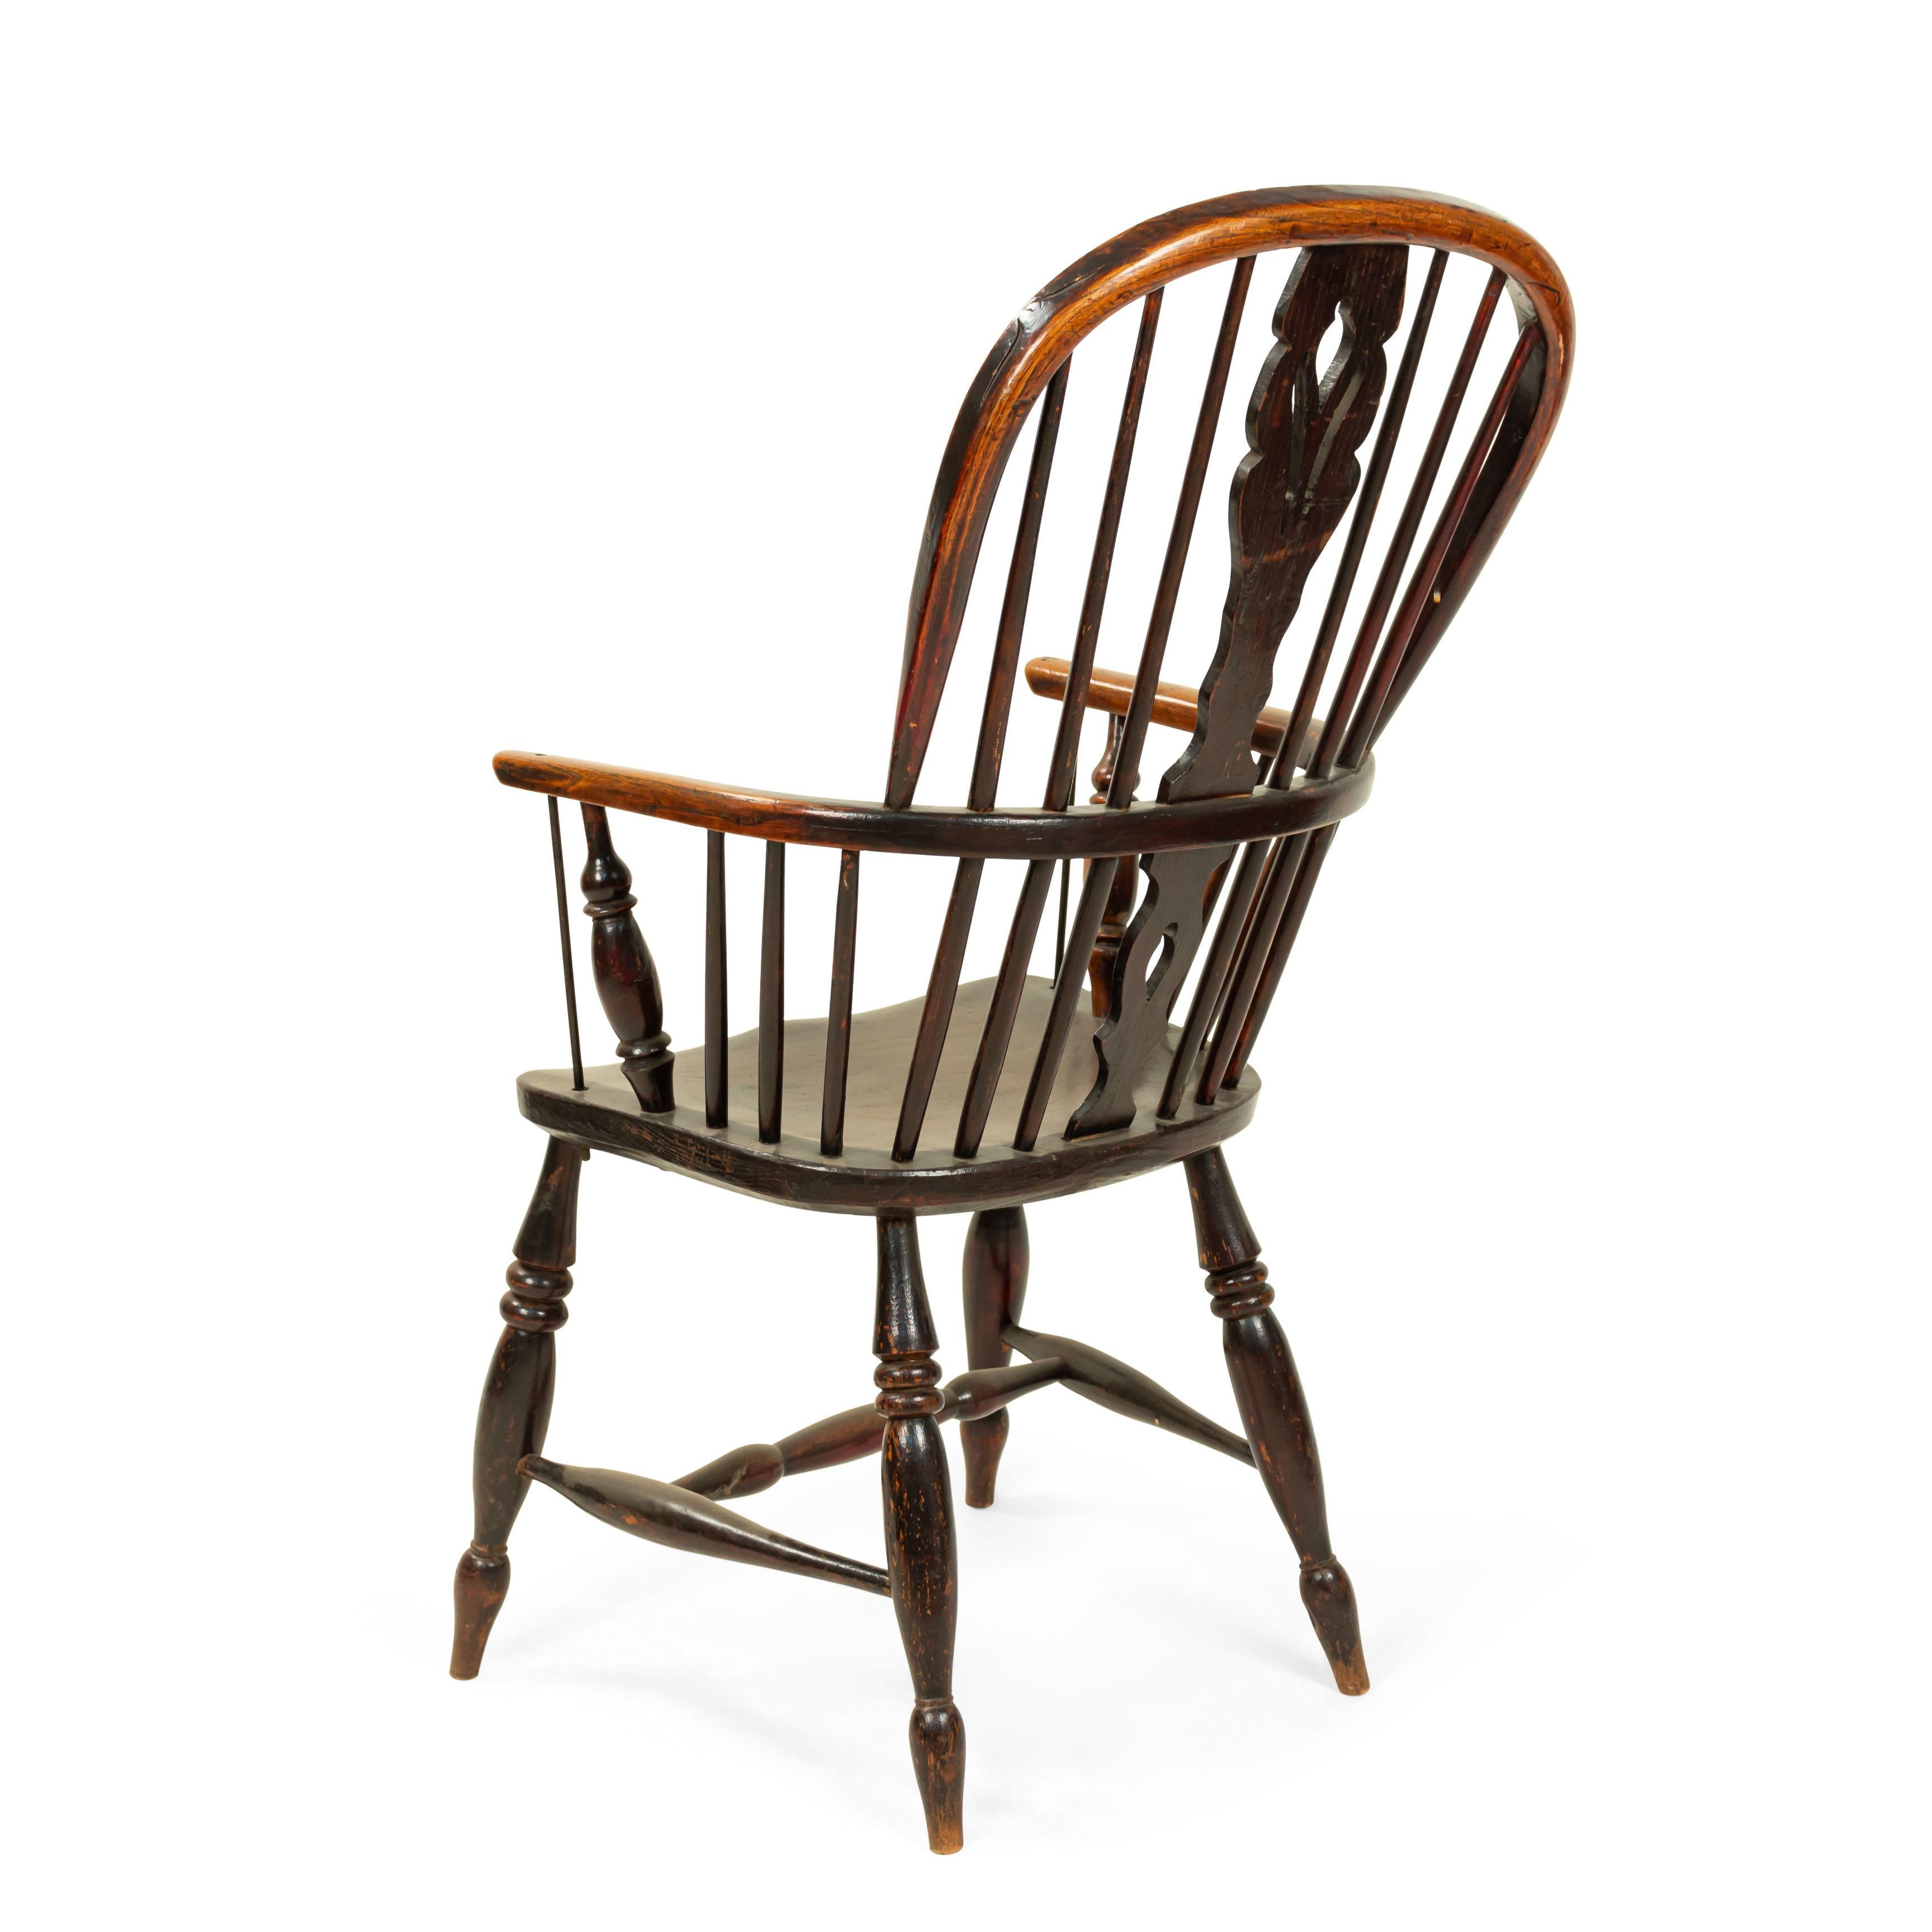 19th Century English Country Windsor Armchair For Sale